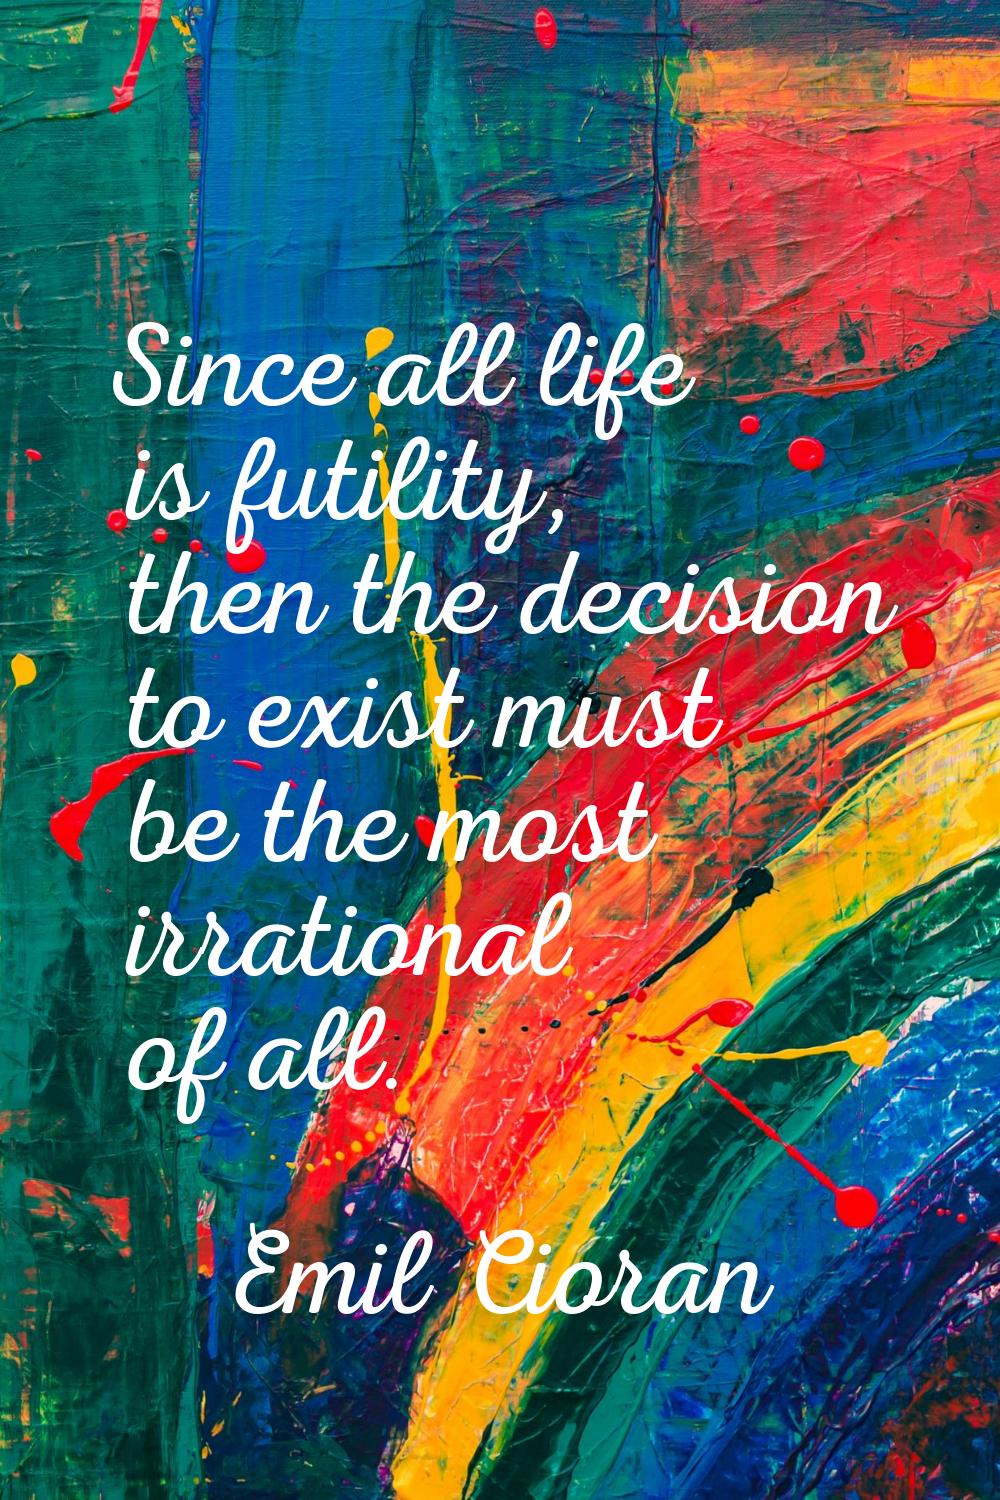 Since all life is futility, then the decision to exist must be the most irrational of all.